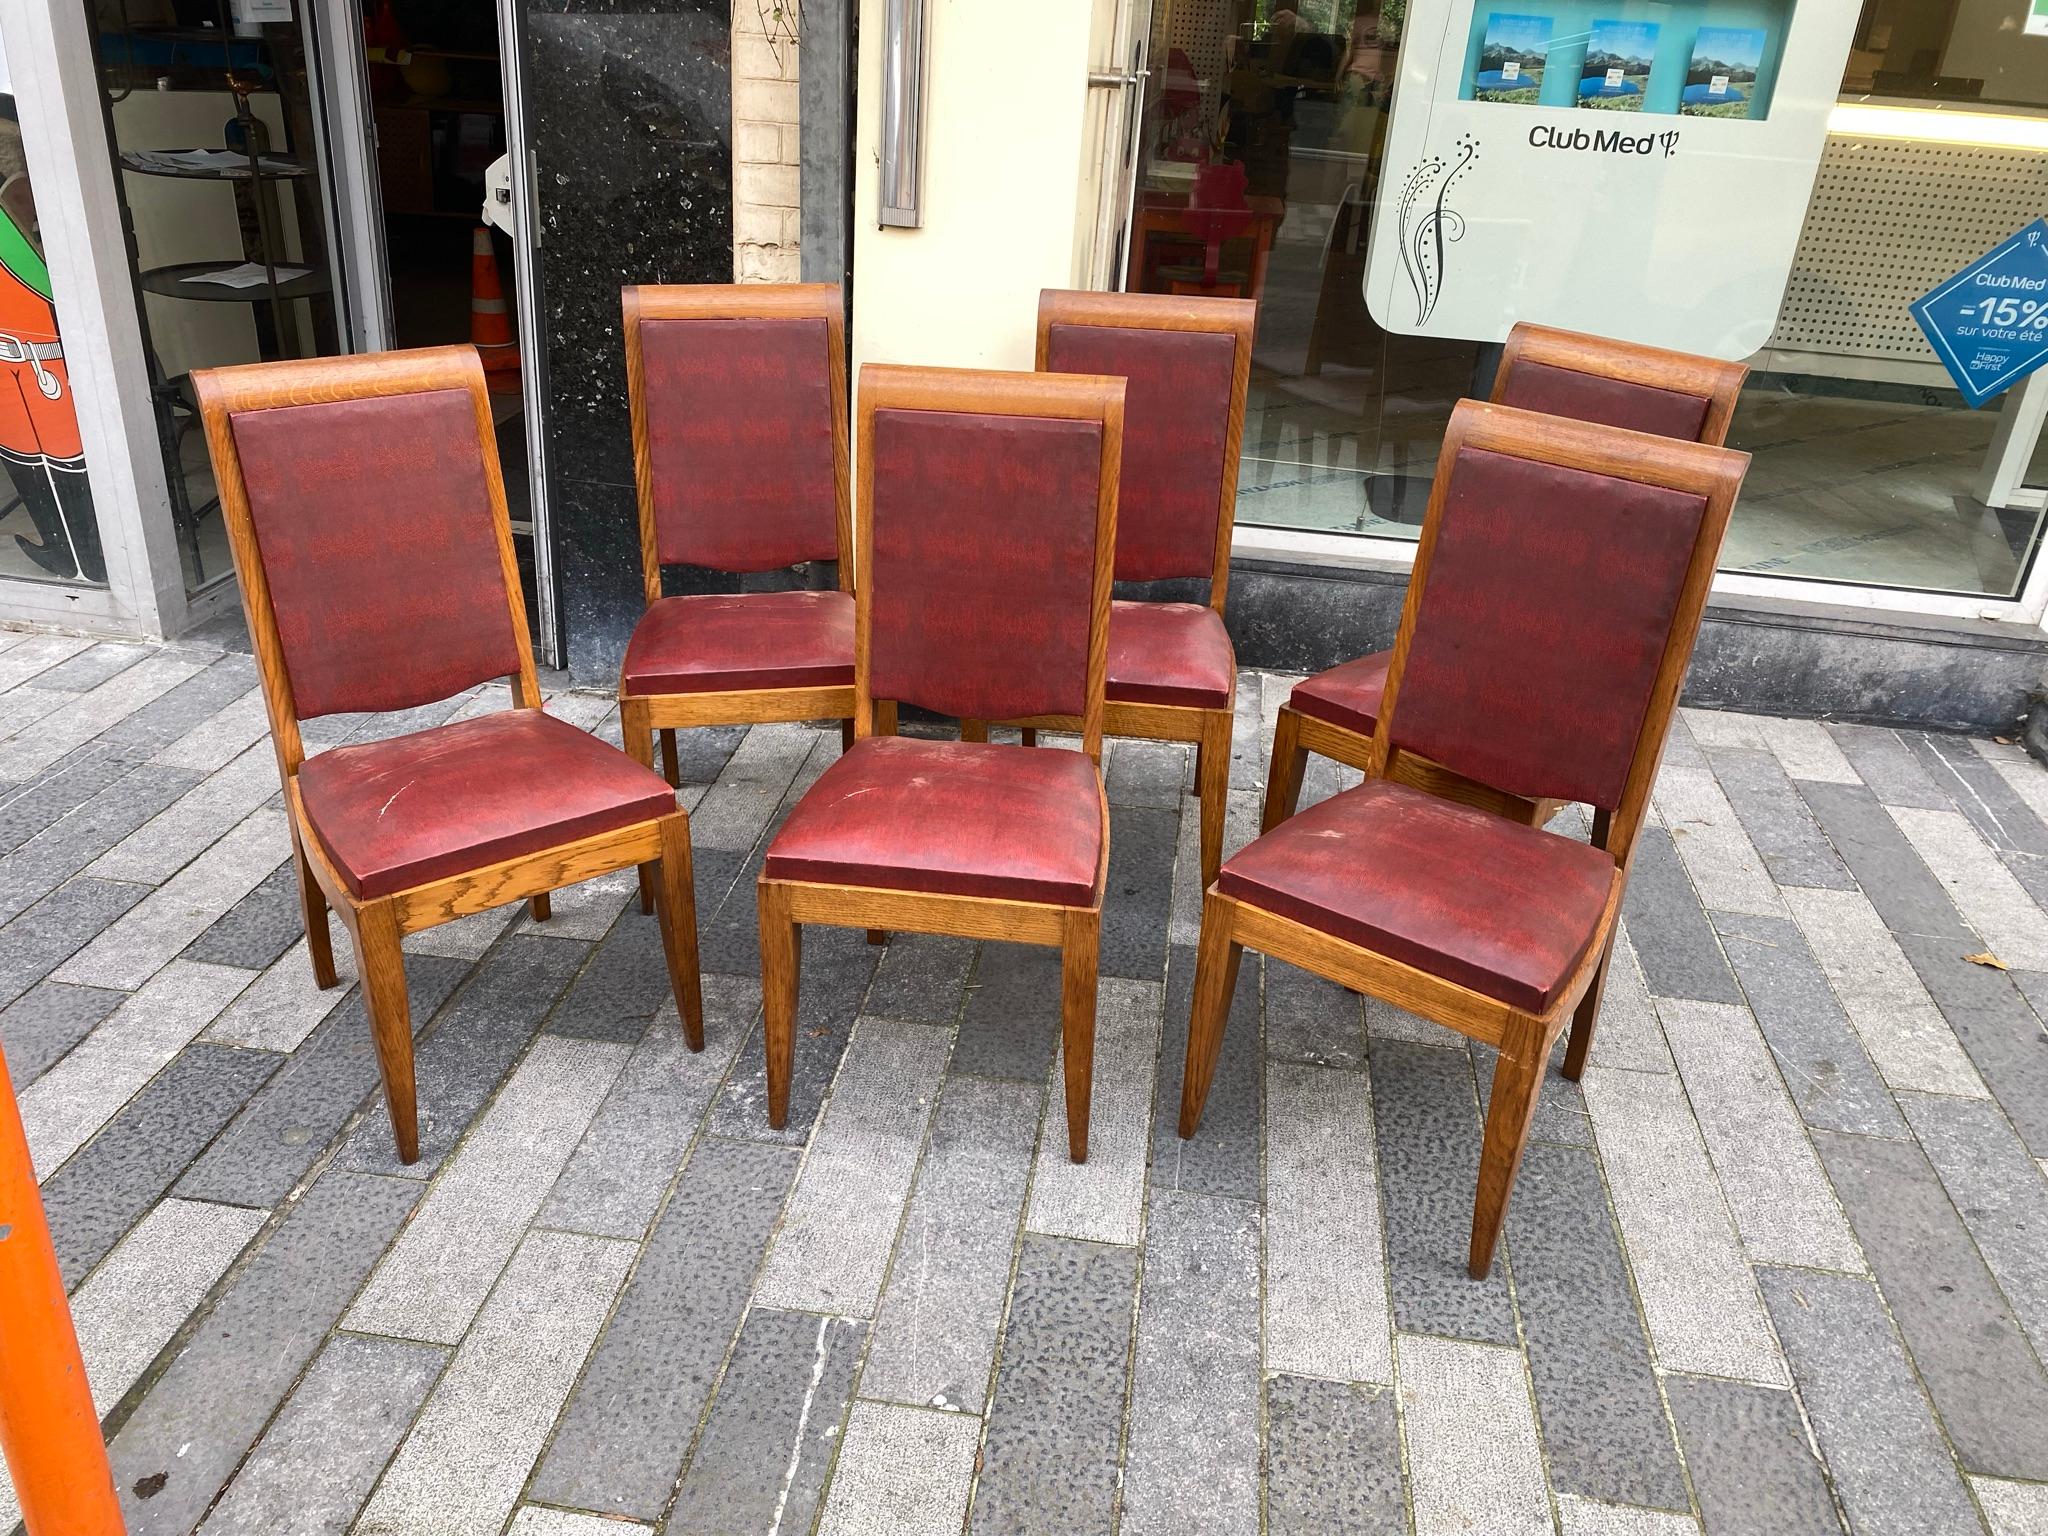 Gaston Poisson, set of six Art Deco chairs in oak circa 1930/1940
the coating needs to be changed.